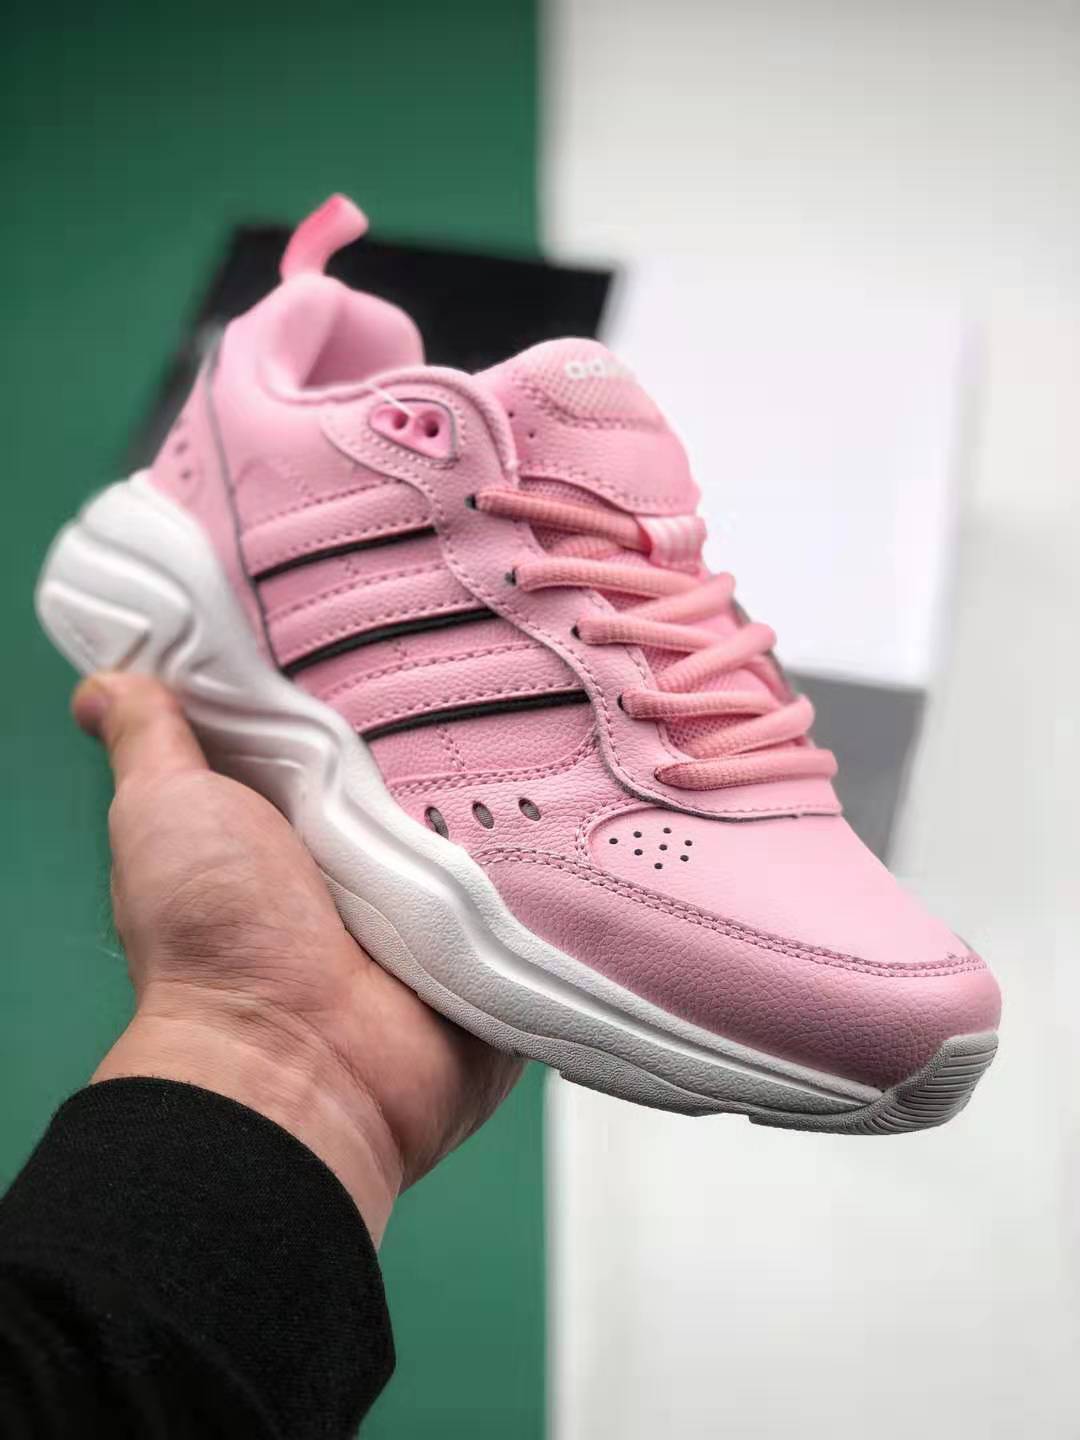 Adidas Neo Strutter Pink White EG6225 - Fashionable and Comfortable Sneakers